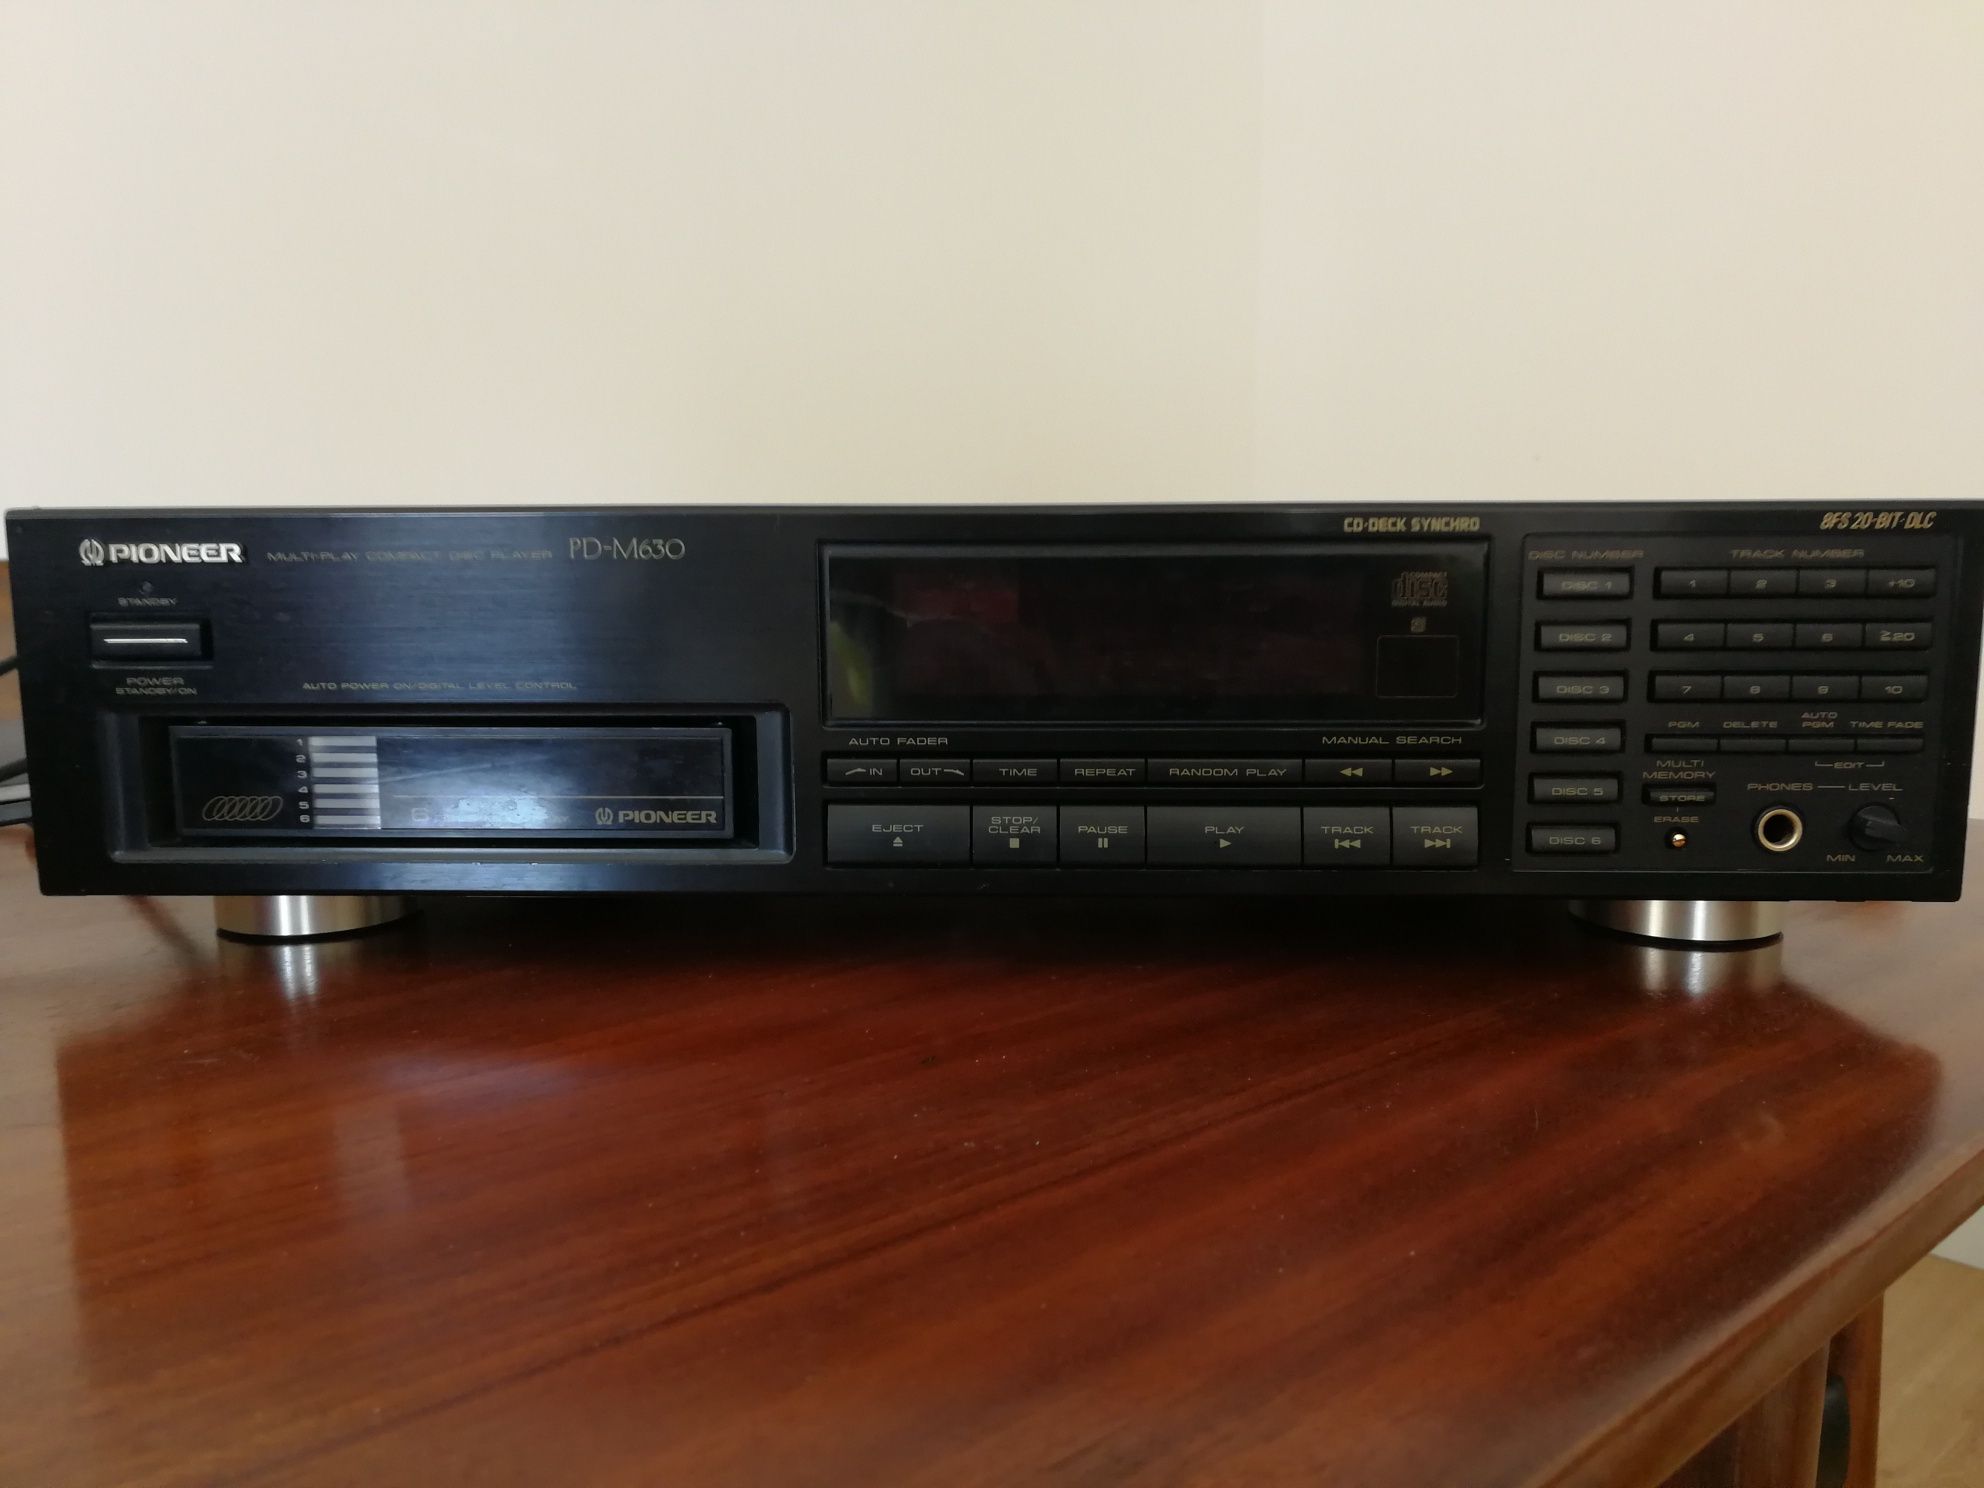 Leitor CD pioneer PD-M670